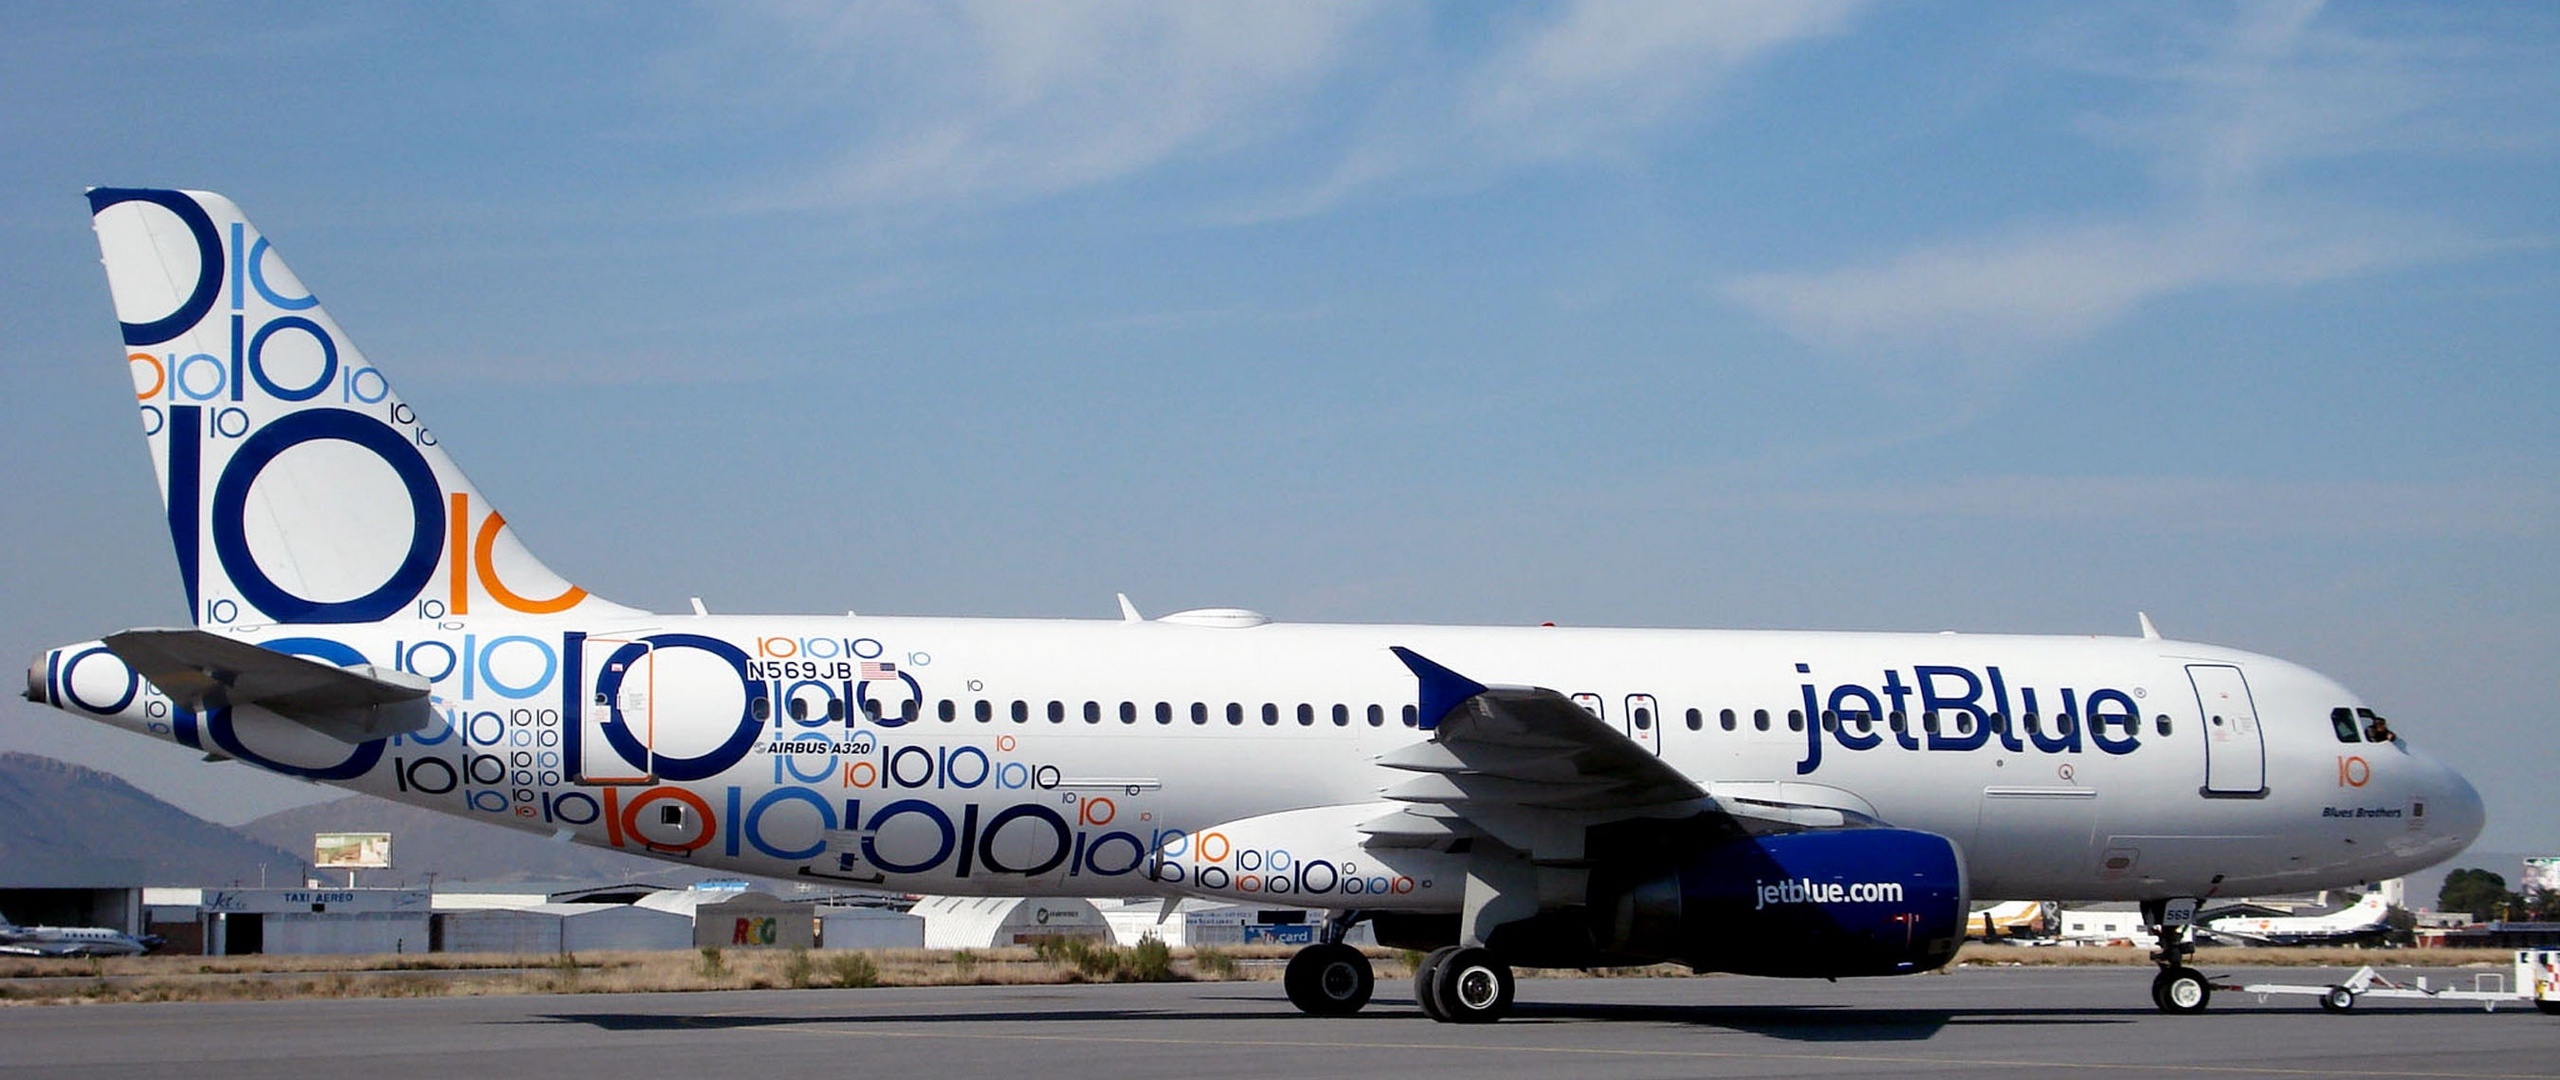 JetBlue Airways, Aircraft wallpapers, Dual screen wallpaper, JetBlue background, 2560x1080 Dual Screen Desktop